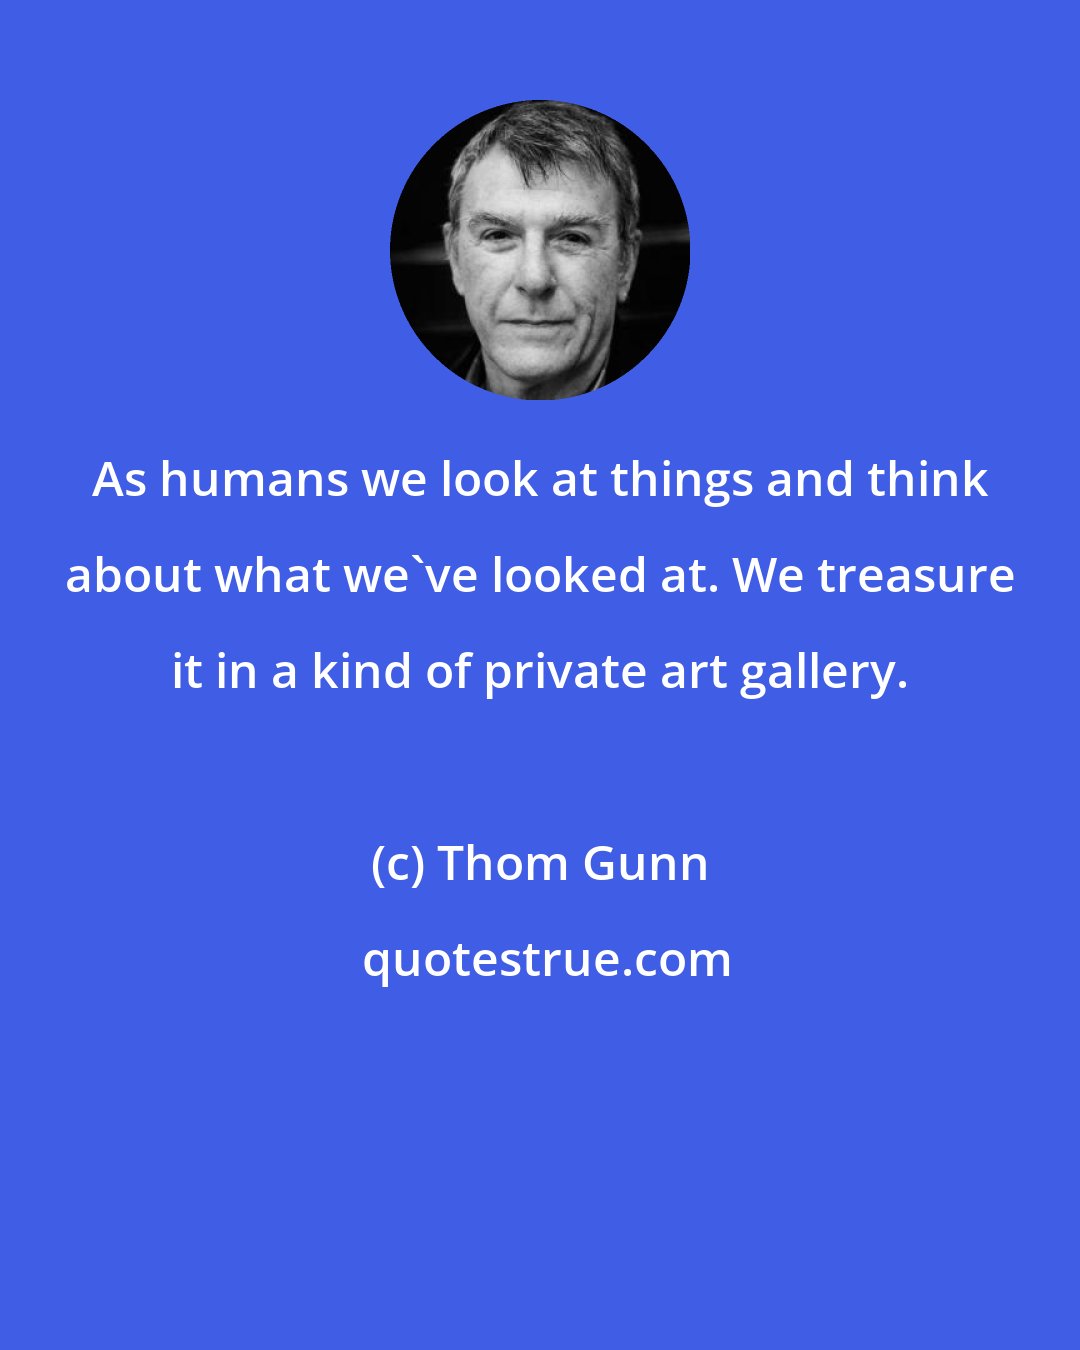 Thom Gunn: As humans we look at things and think about what we've looked at. We treasure it in a kind of private art gallery.